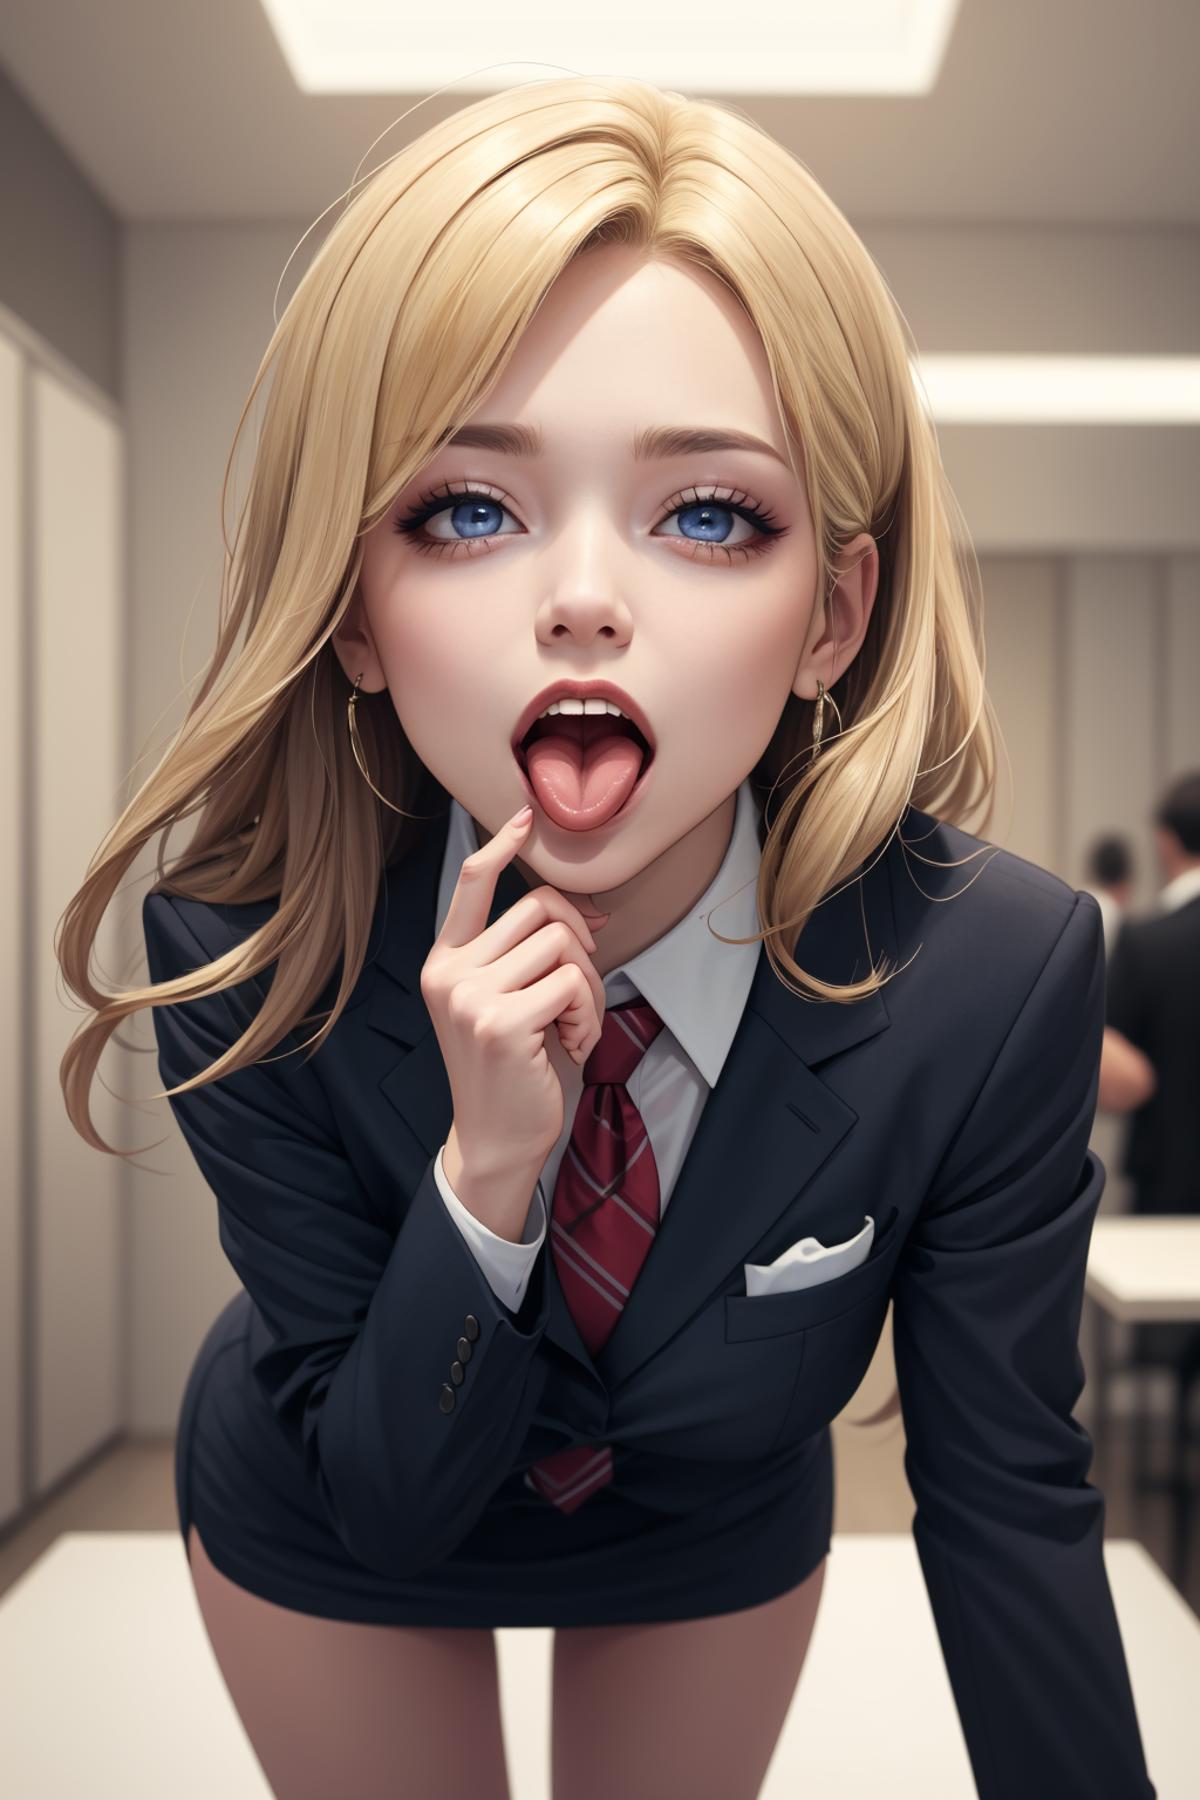 A computer-generated image of a woman wearing a business suit, tie, and blue eyes, biting her lip.